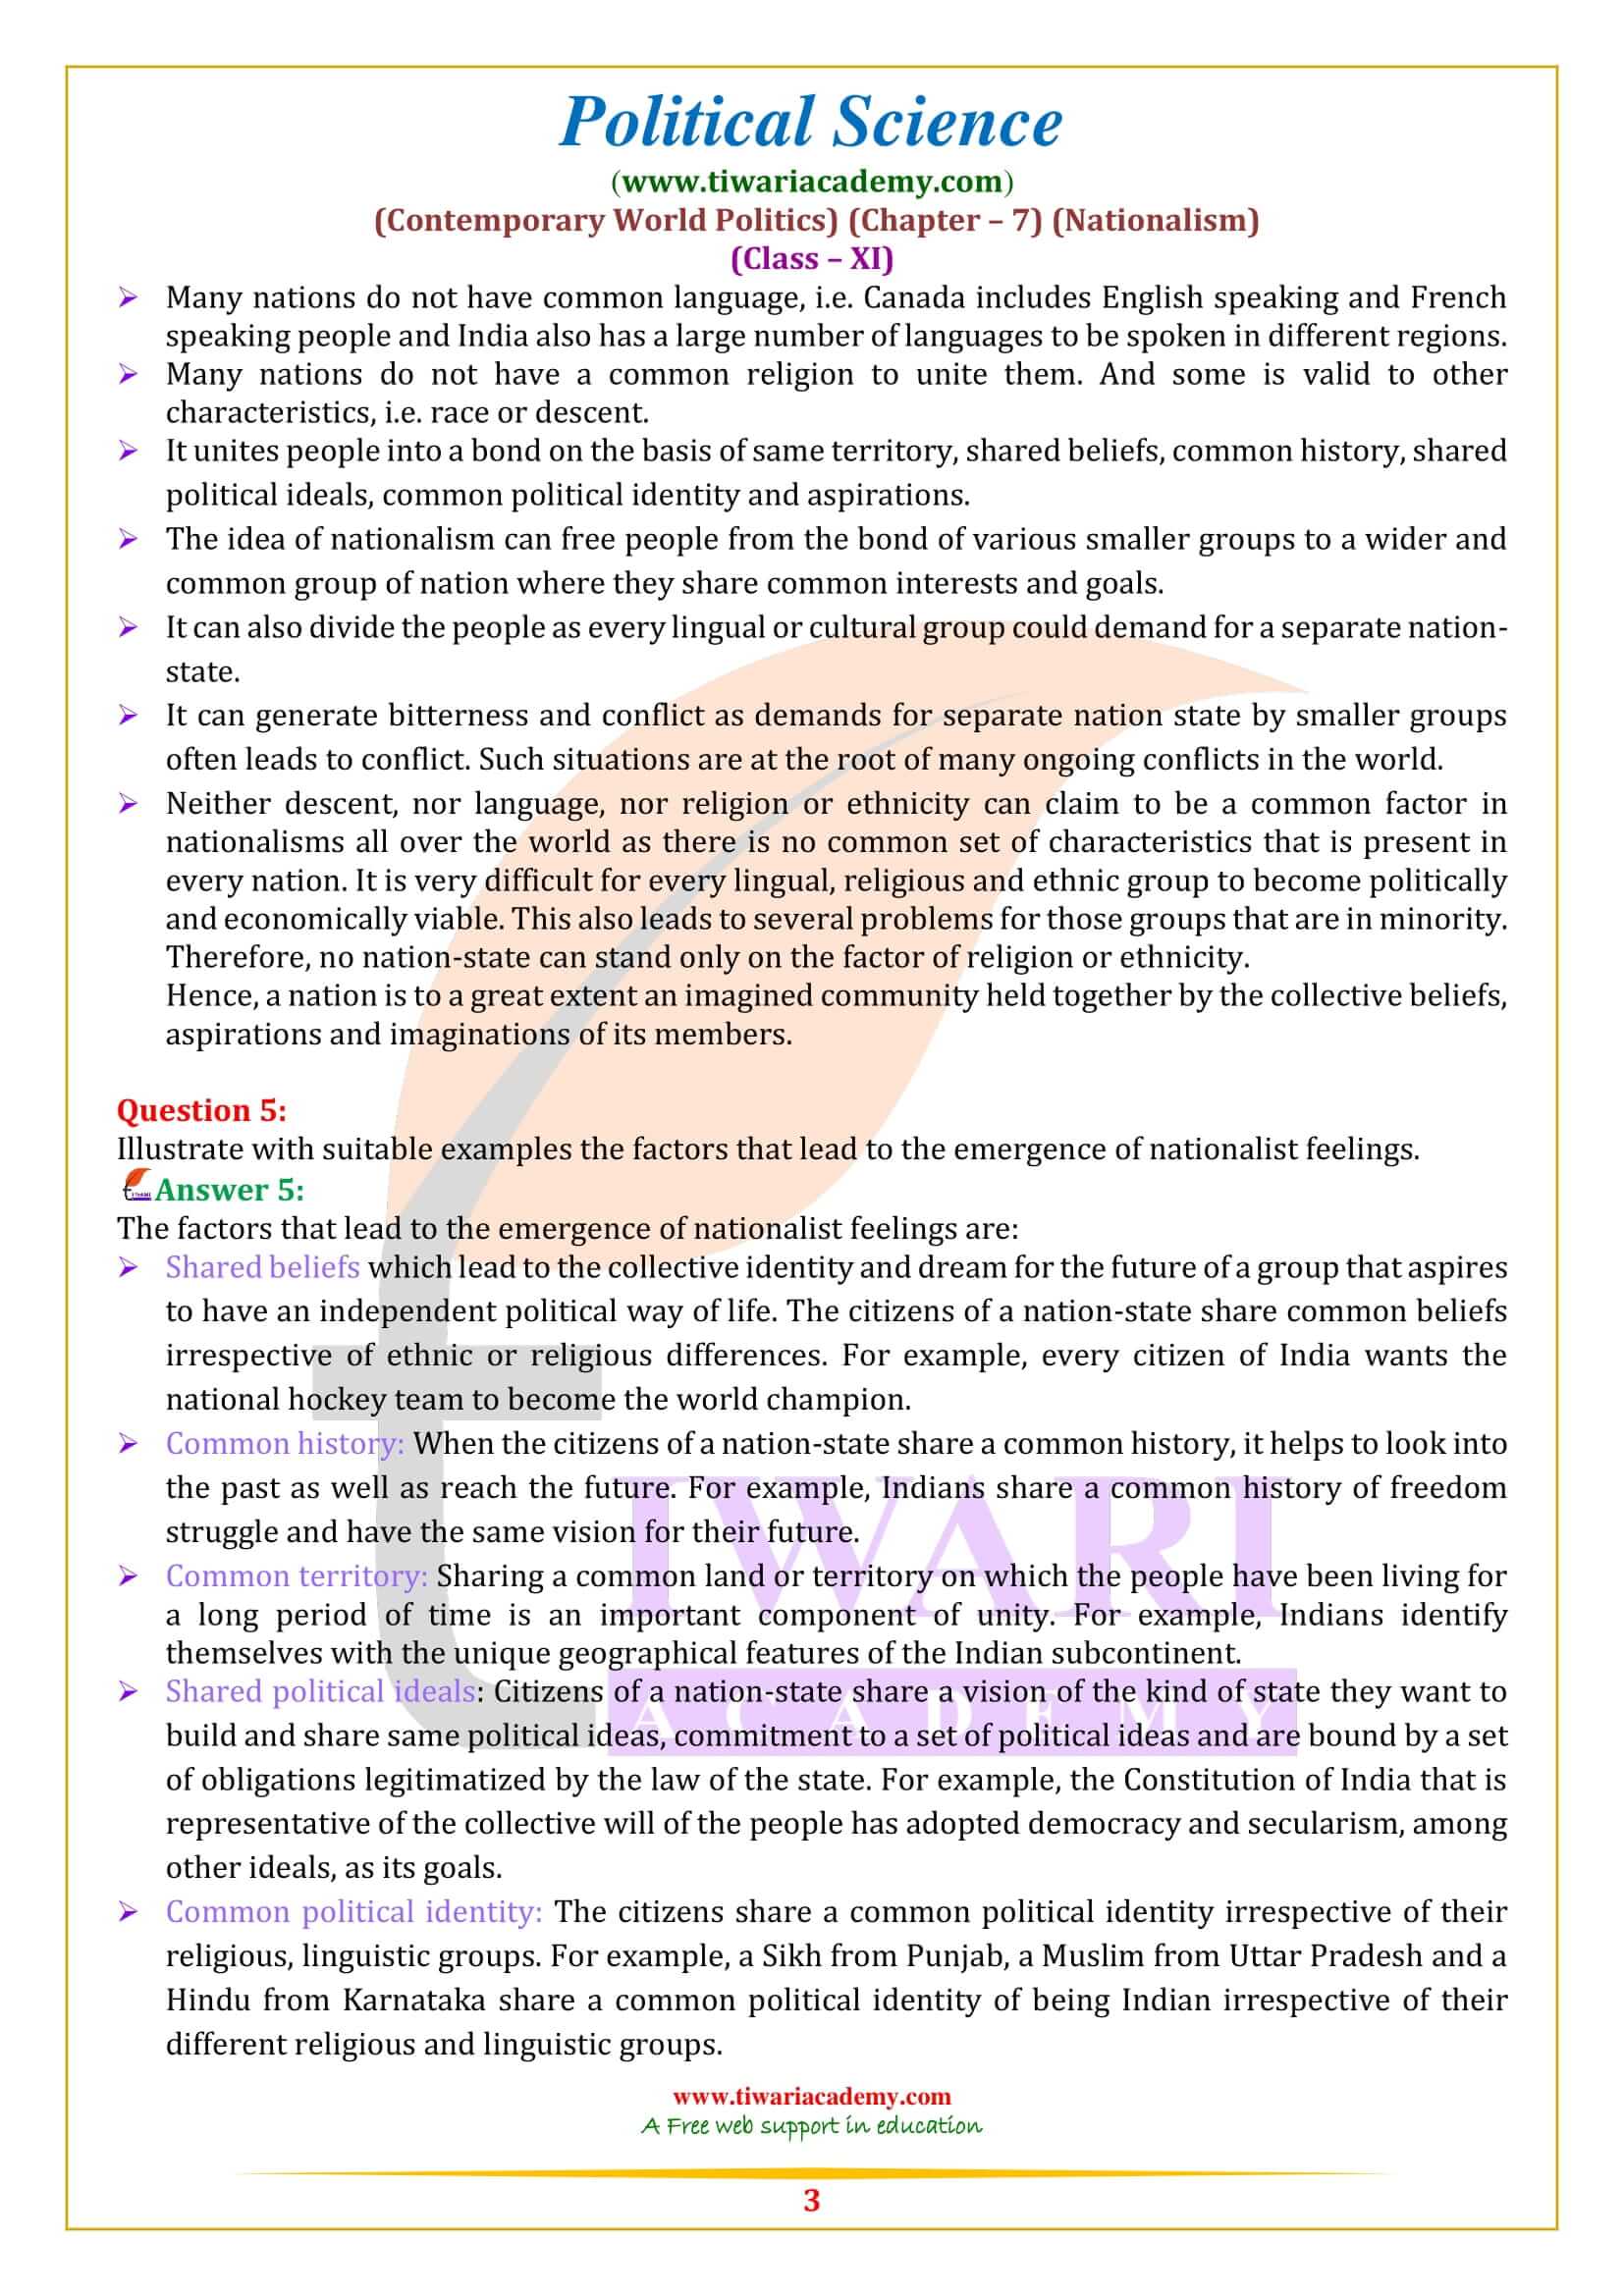 NCERT Solutions for Class 11 Political Science Chapter 7 in English Medium